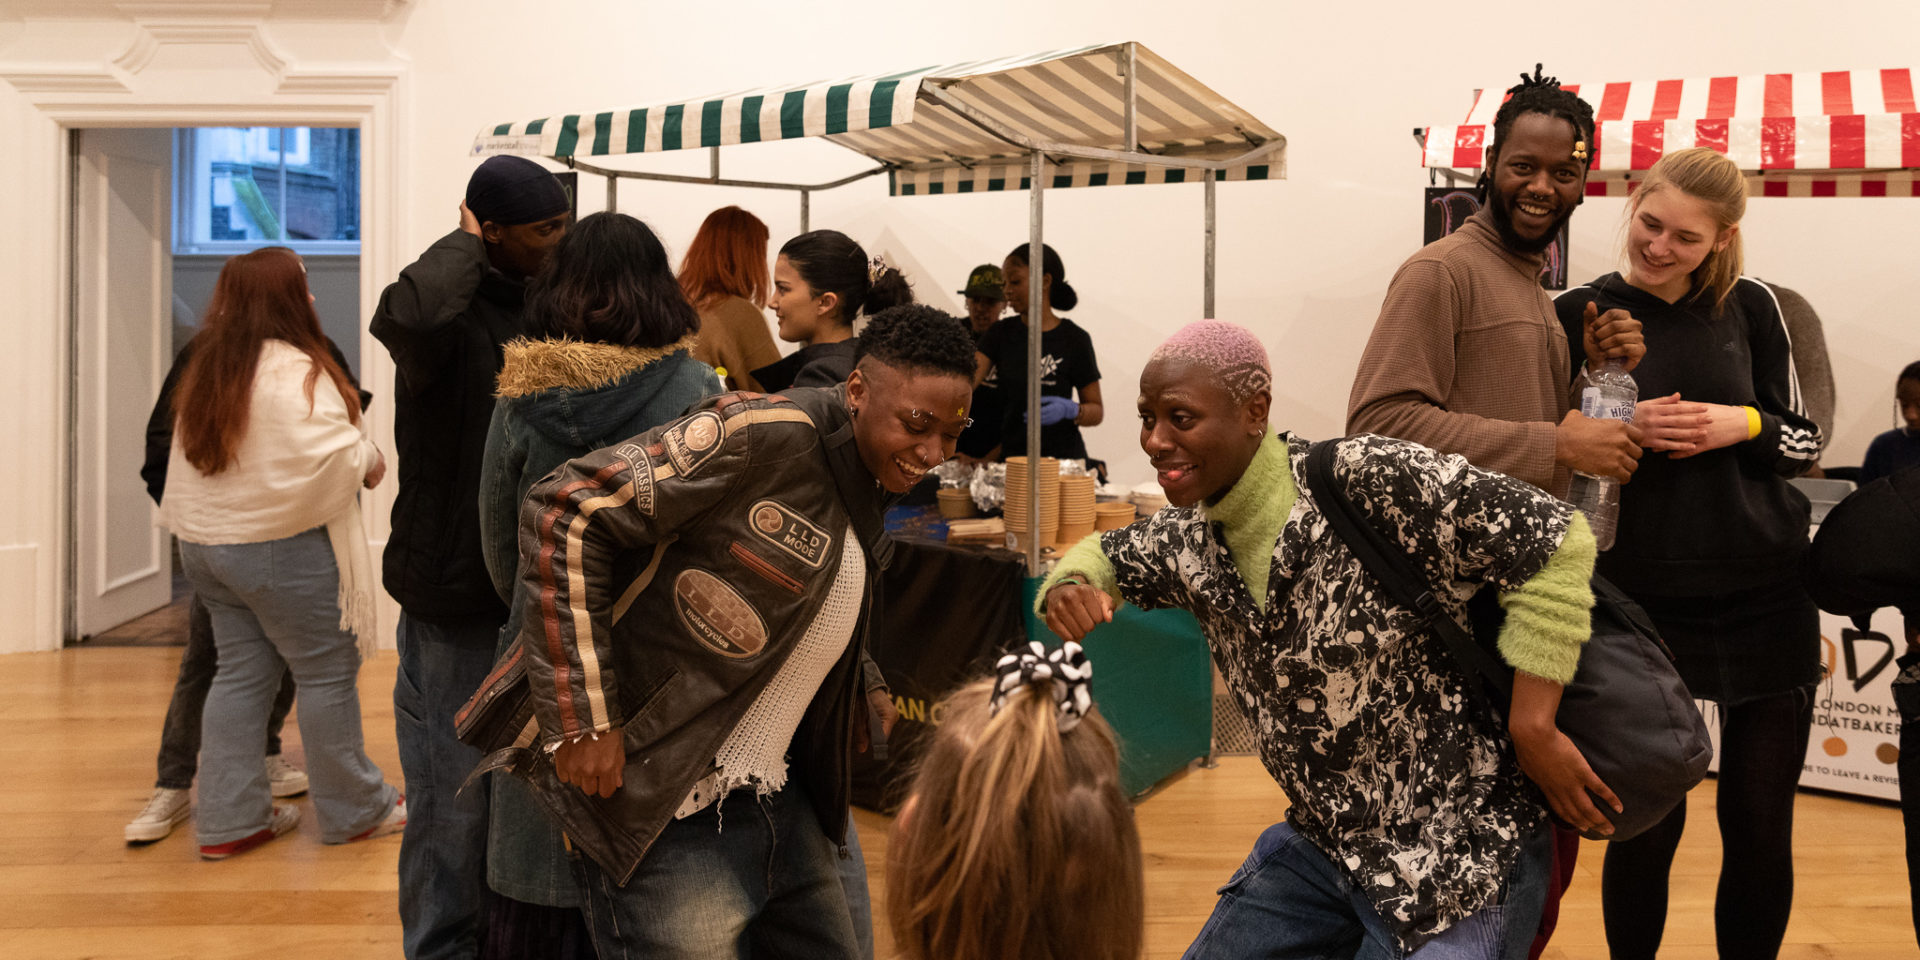 Two young people dance together beside a young child. Other people watch them and walk around. There are market stalls behind them.